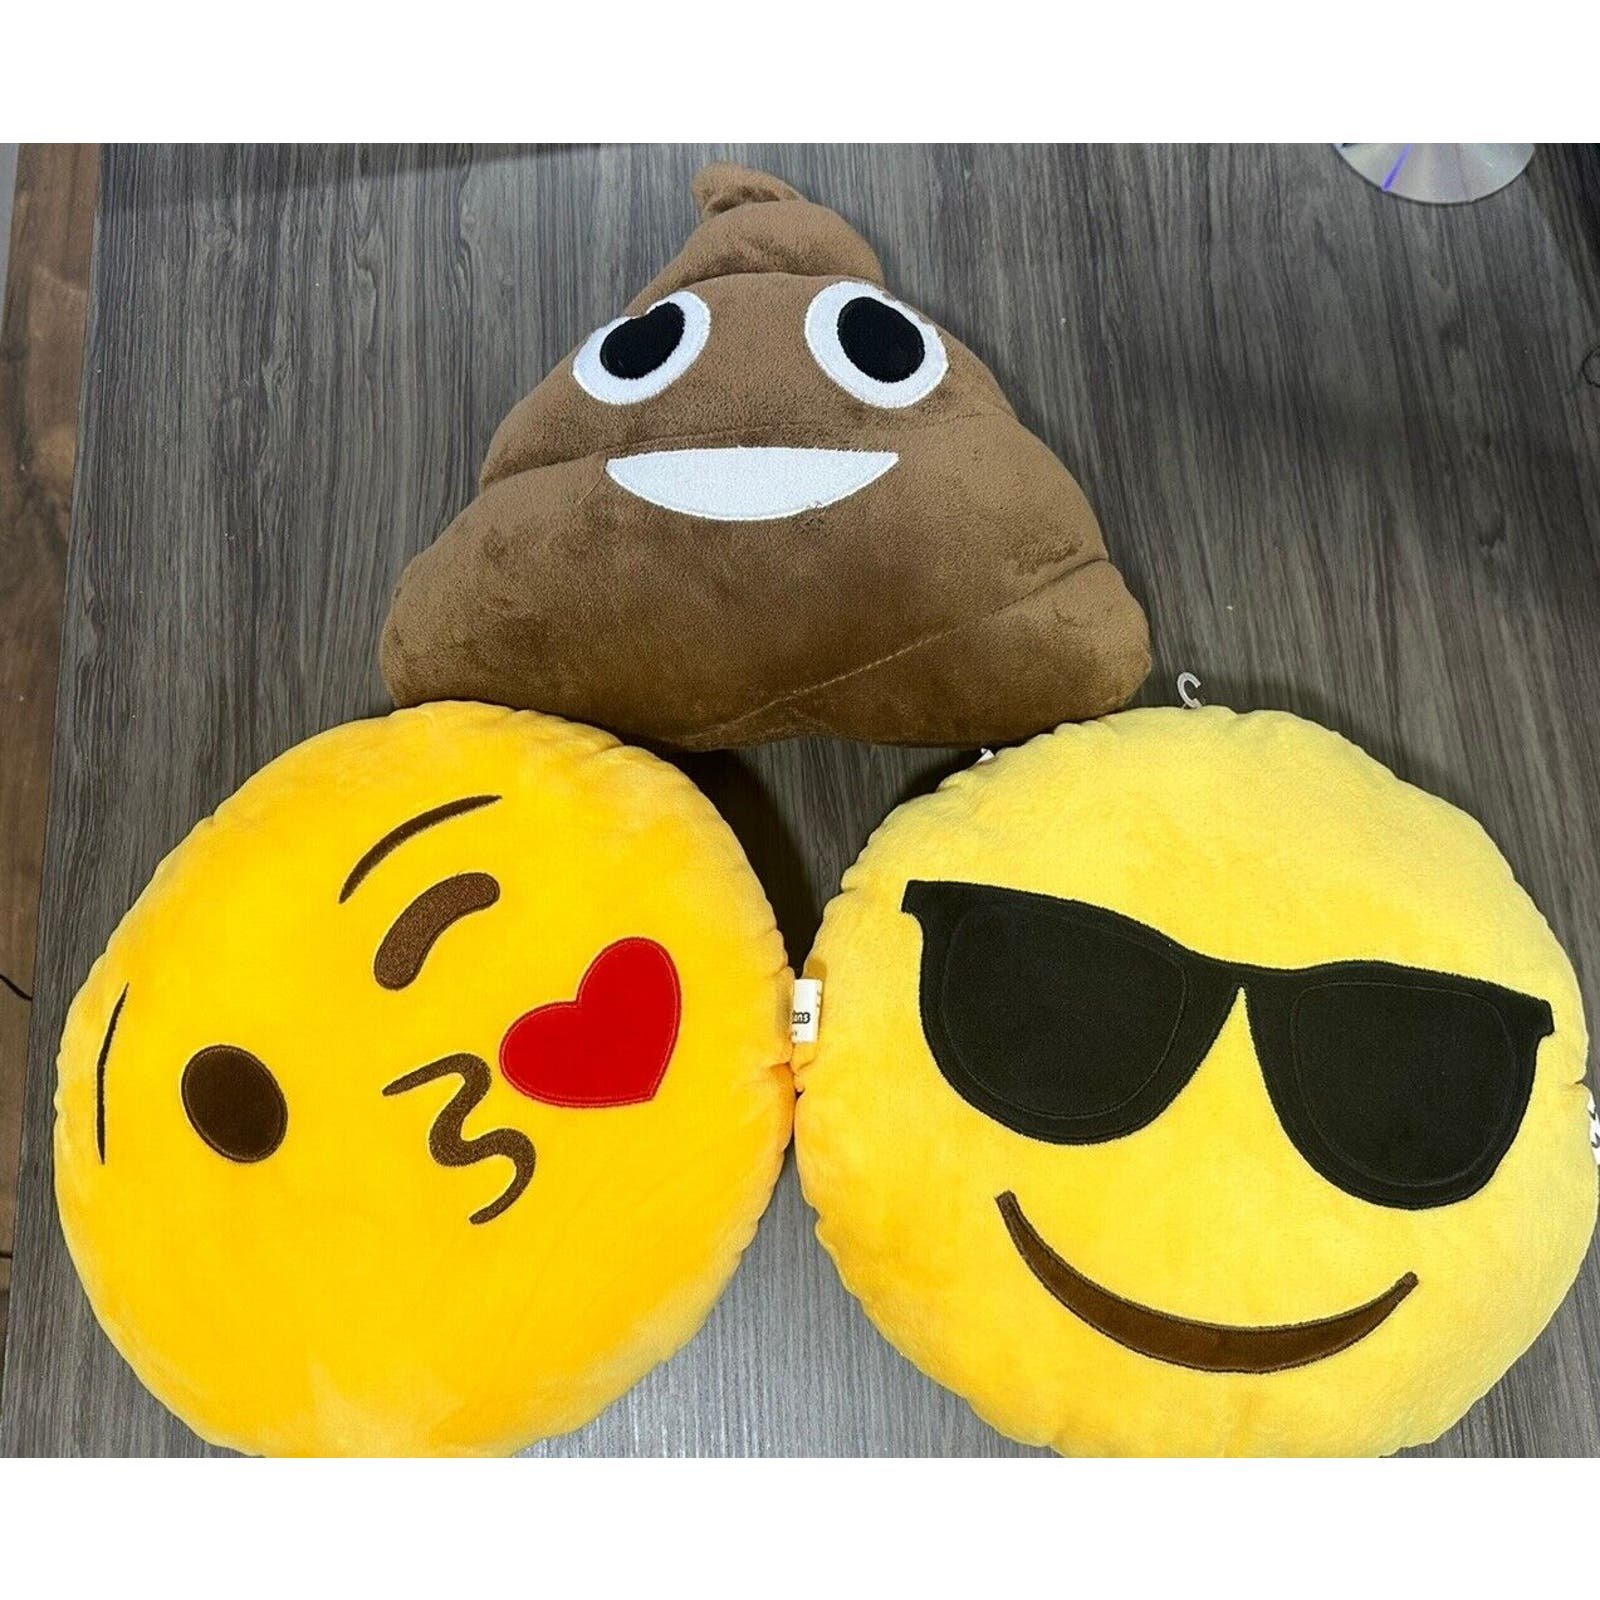 Pillow EMOJI PILLOWS lot of 3 great condition Poop+kiss+cool Sunglasses Gayt2aNxf